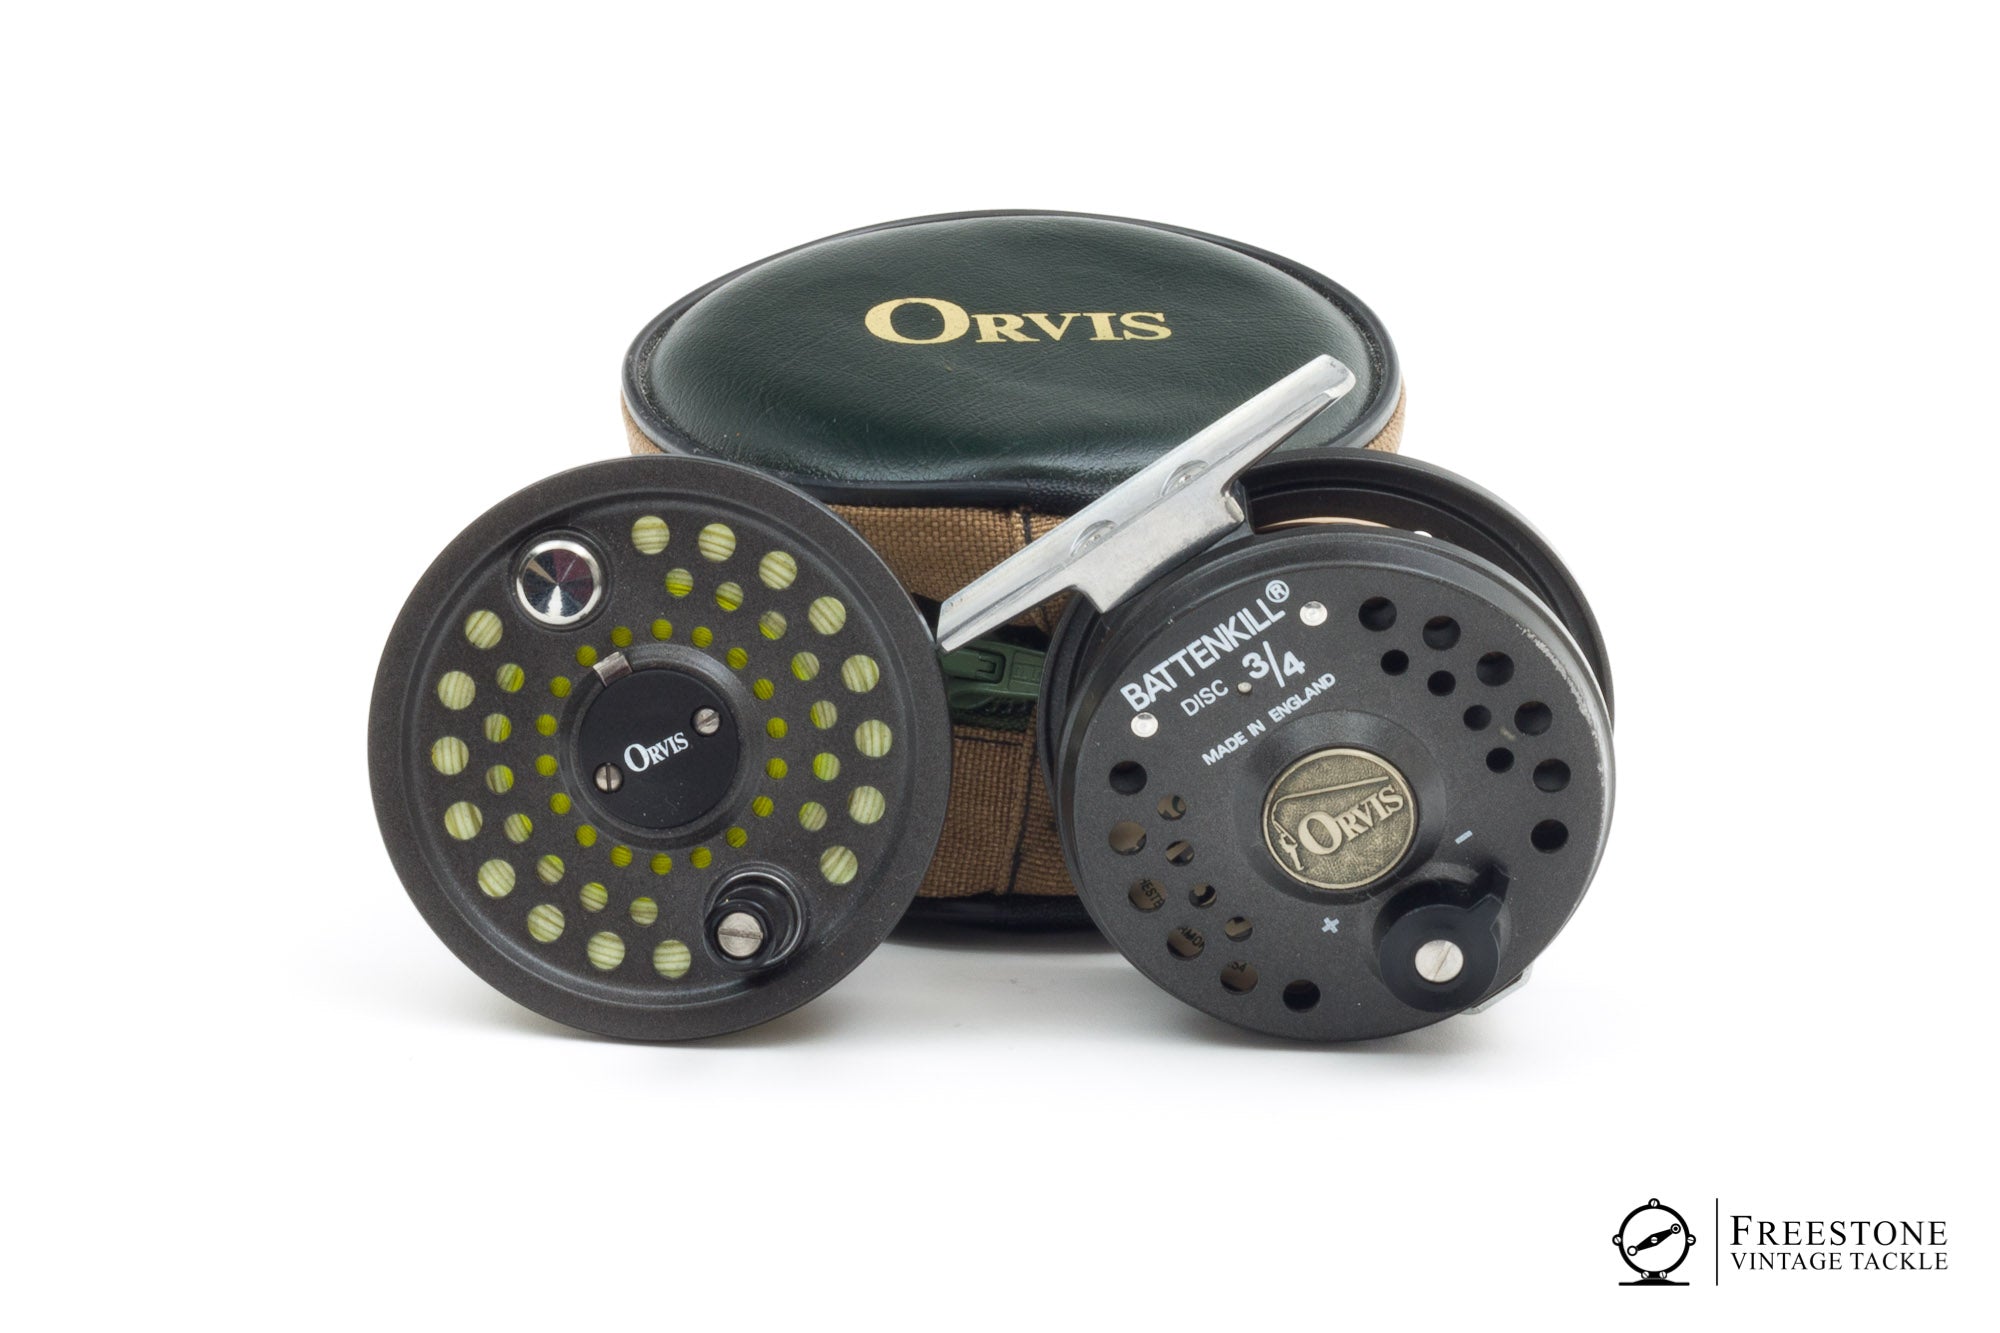 Parts for Orvis Battenkill 3/4 - Made in England, Classic Fly Reels